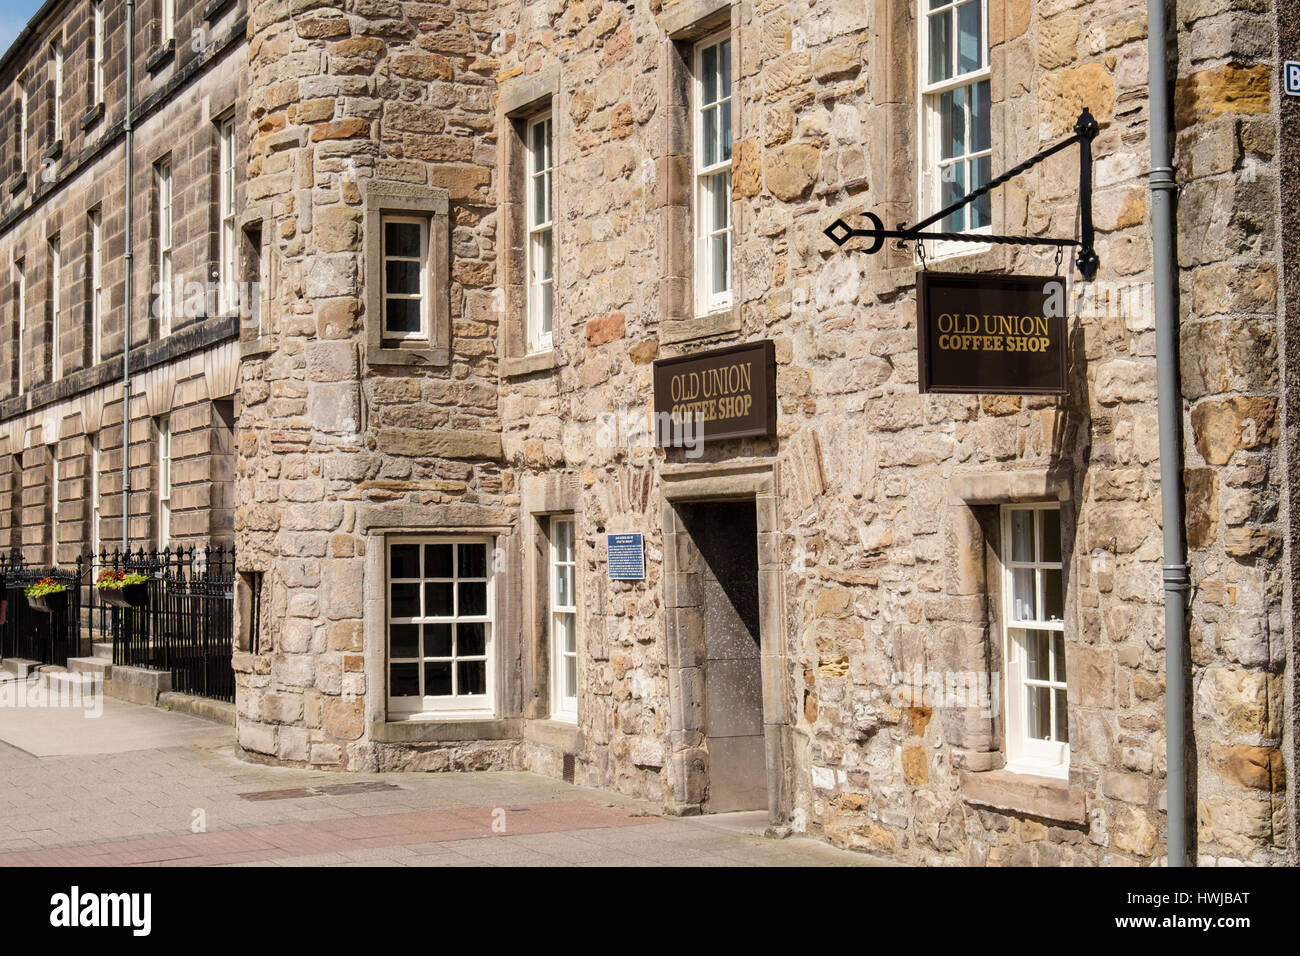 The Old Union Coffee Shop.  North Street, Royal Burgh of St Andrews, Fife, Scotland, UK, Britain, Europe Stock Photo